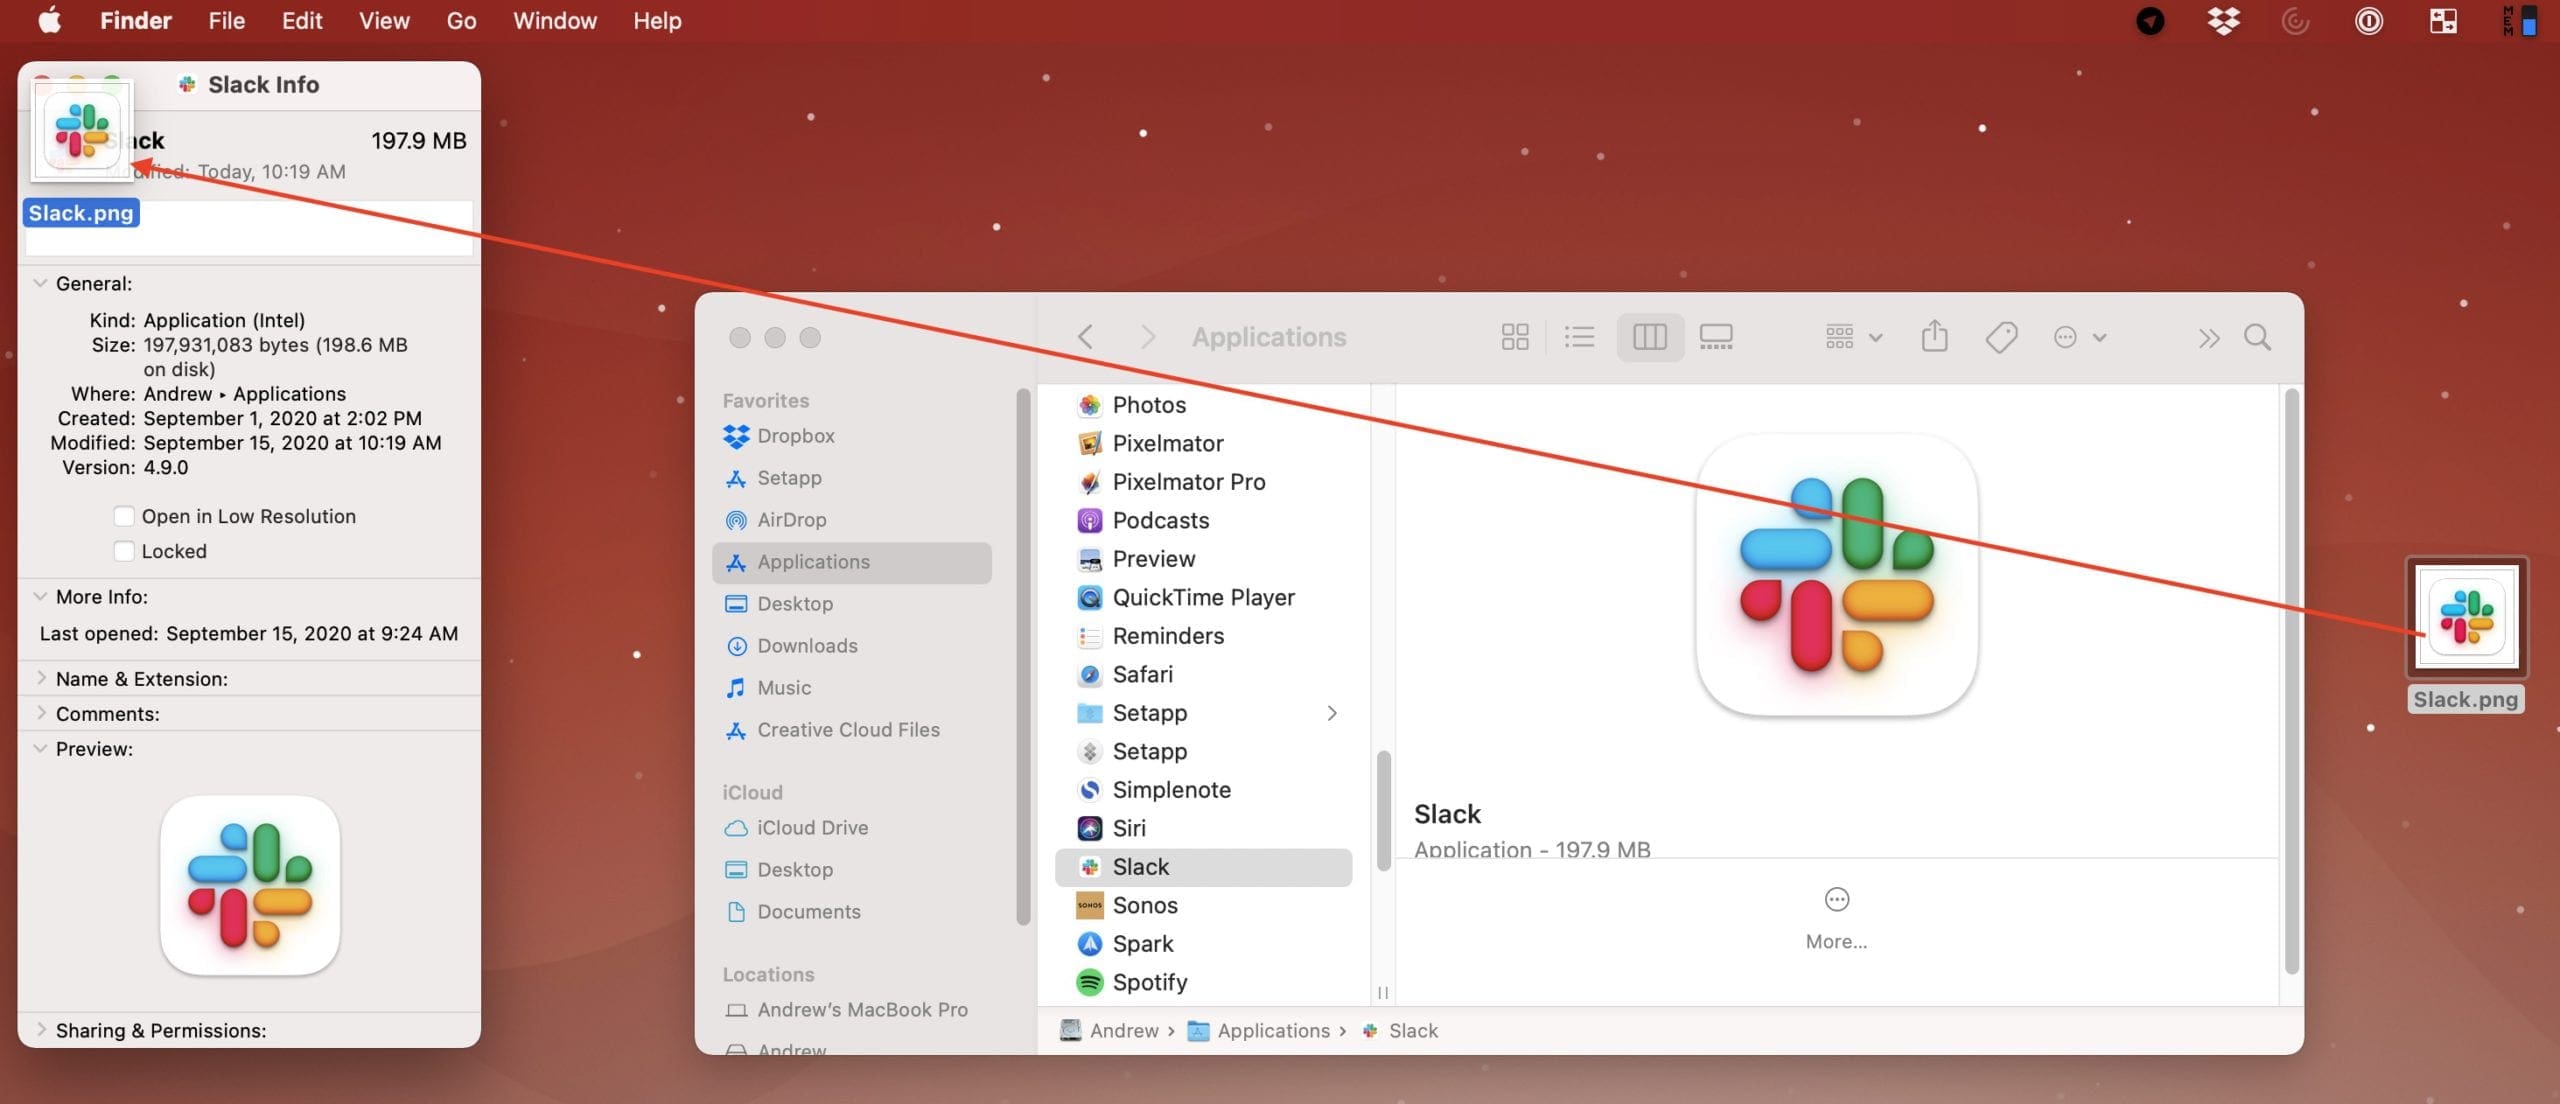 How To Change The Icons For Your Favorite Apps On Macos Big Sur Appletoolbox